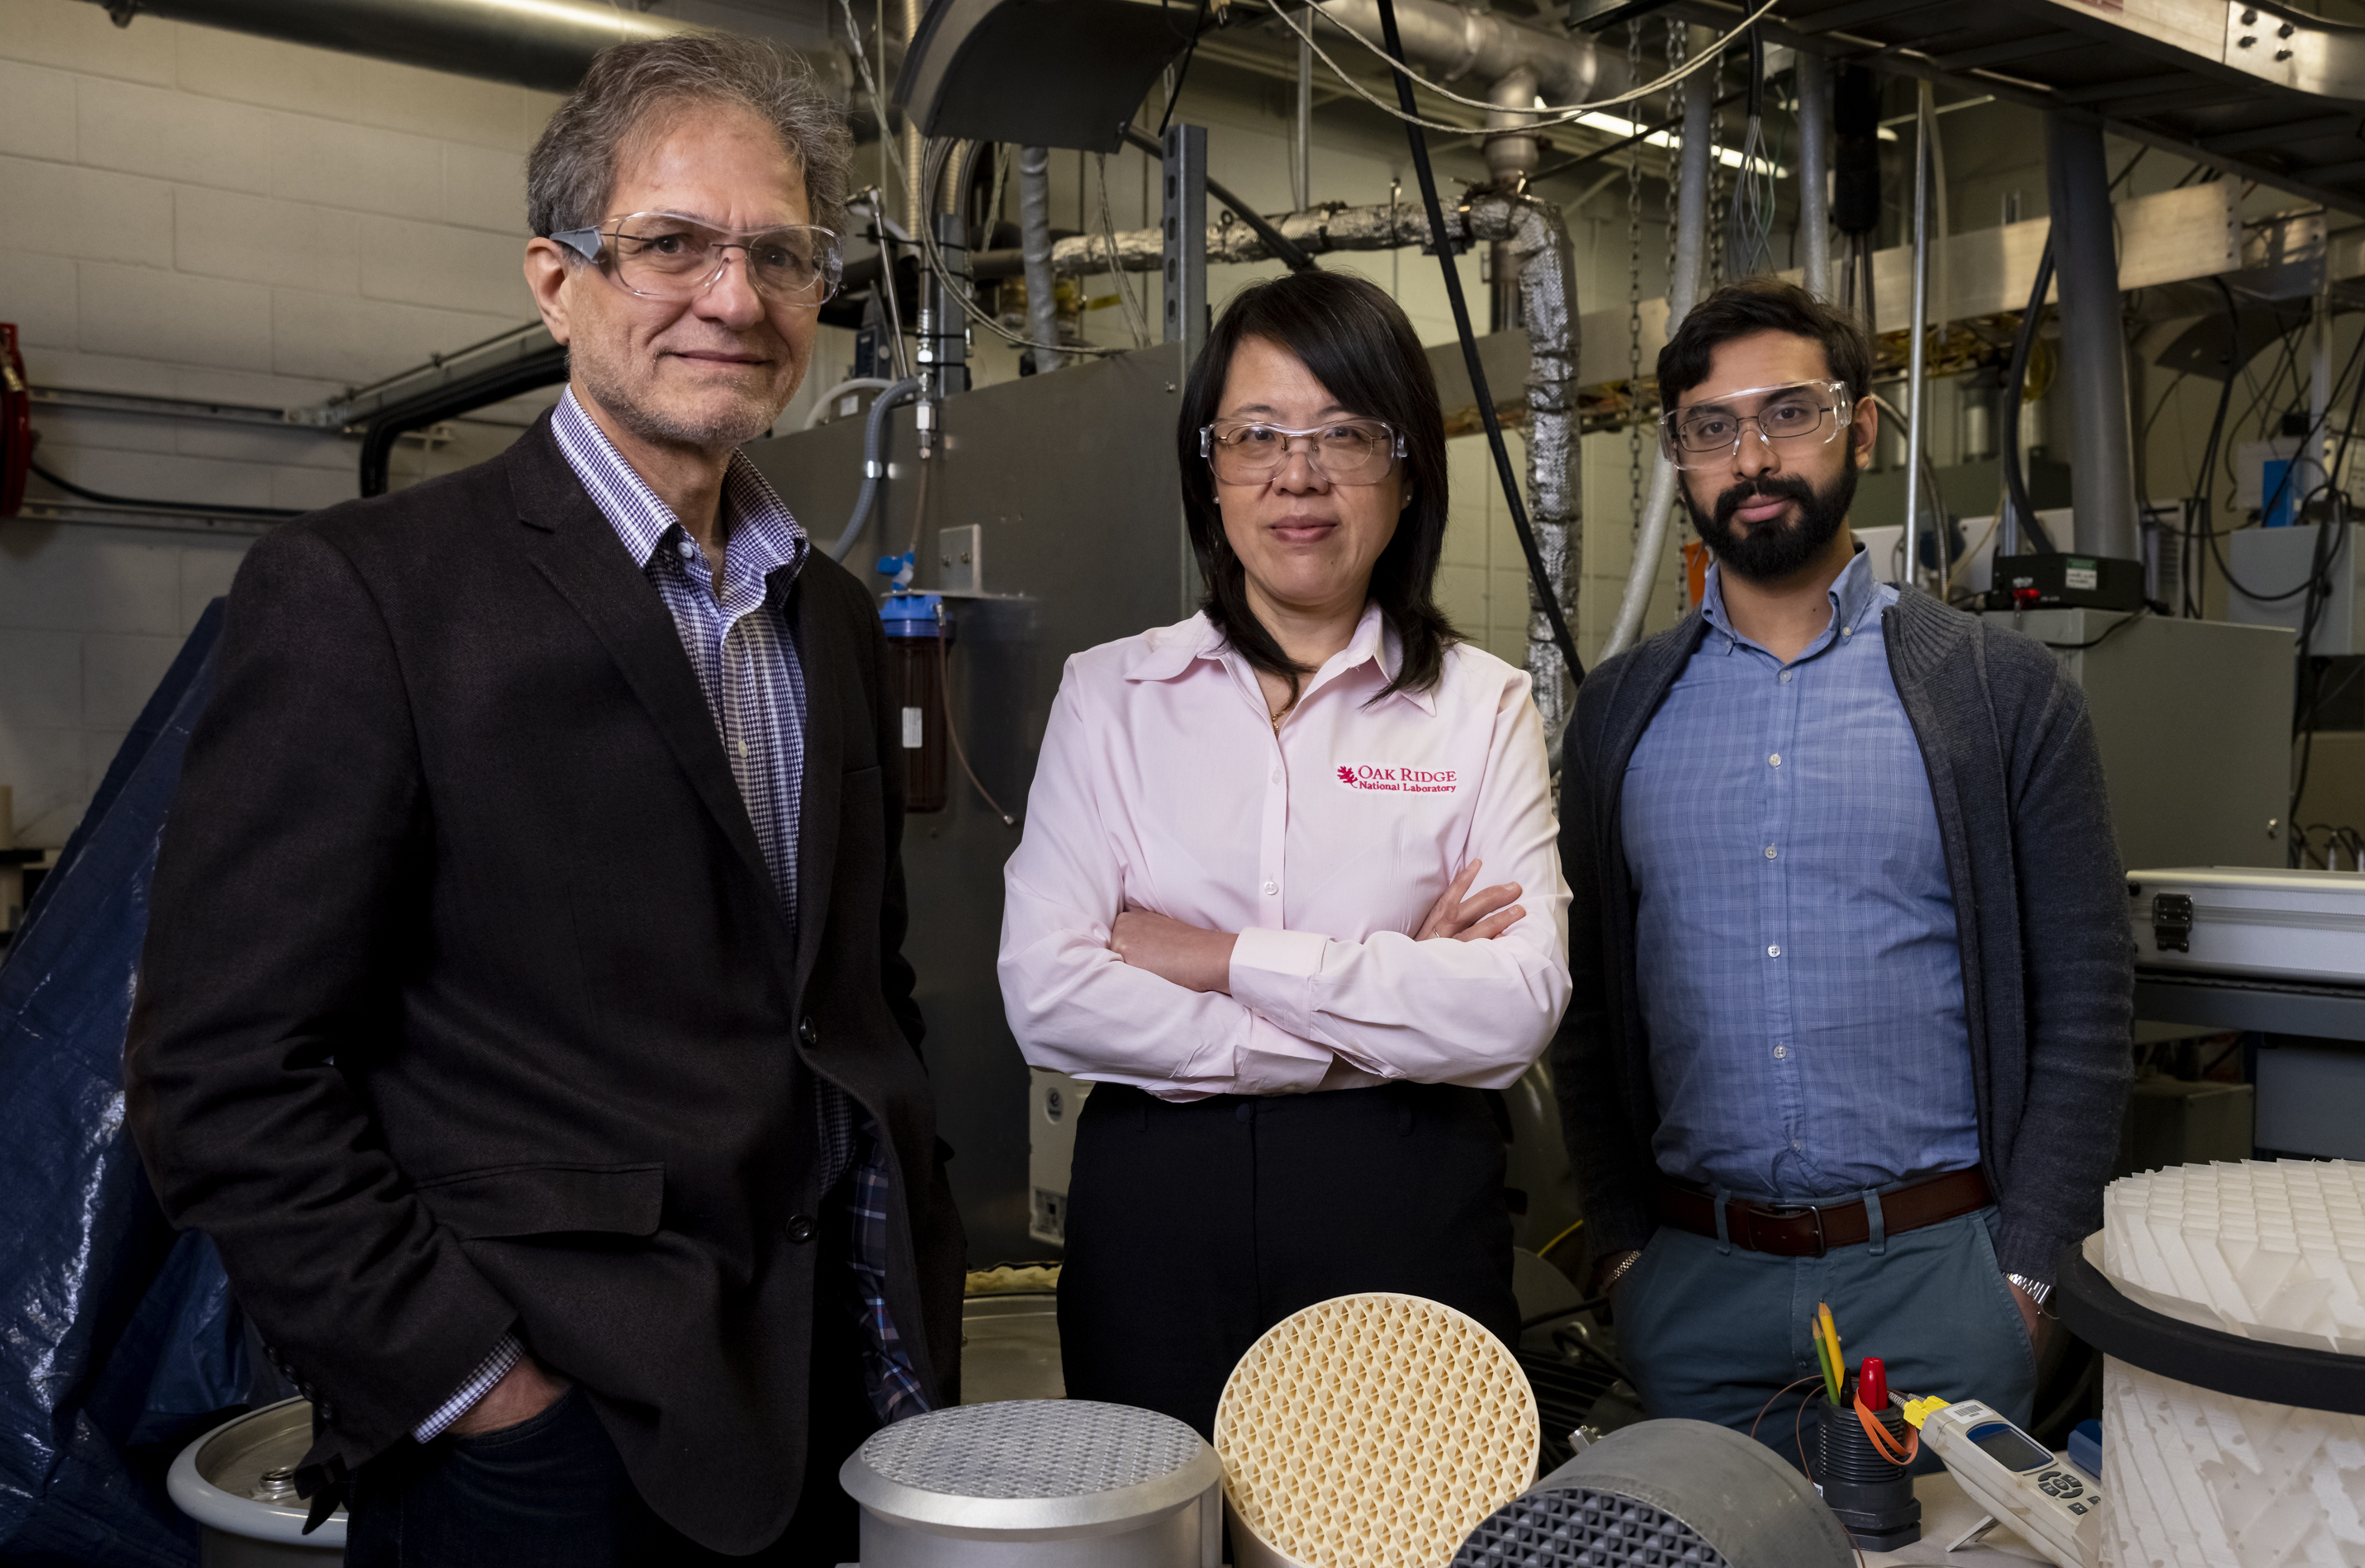 The ORNL researchers (pictured) used 3D printing to optimize their device for carbon dioxide absorbency. Photo via Carlos Jones, ORNL.